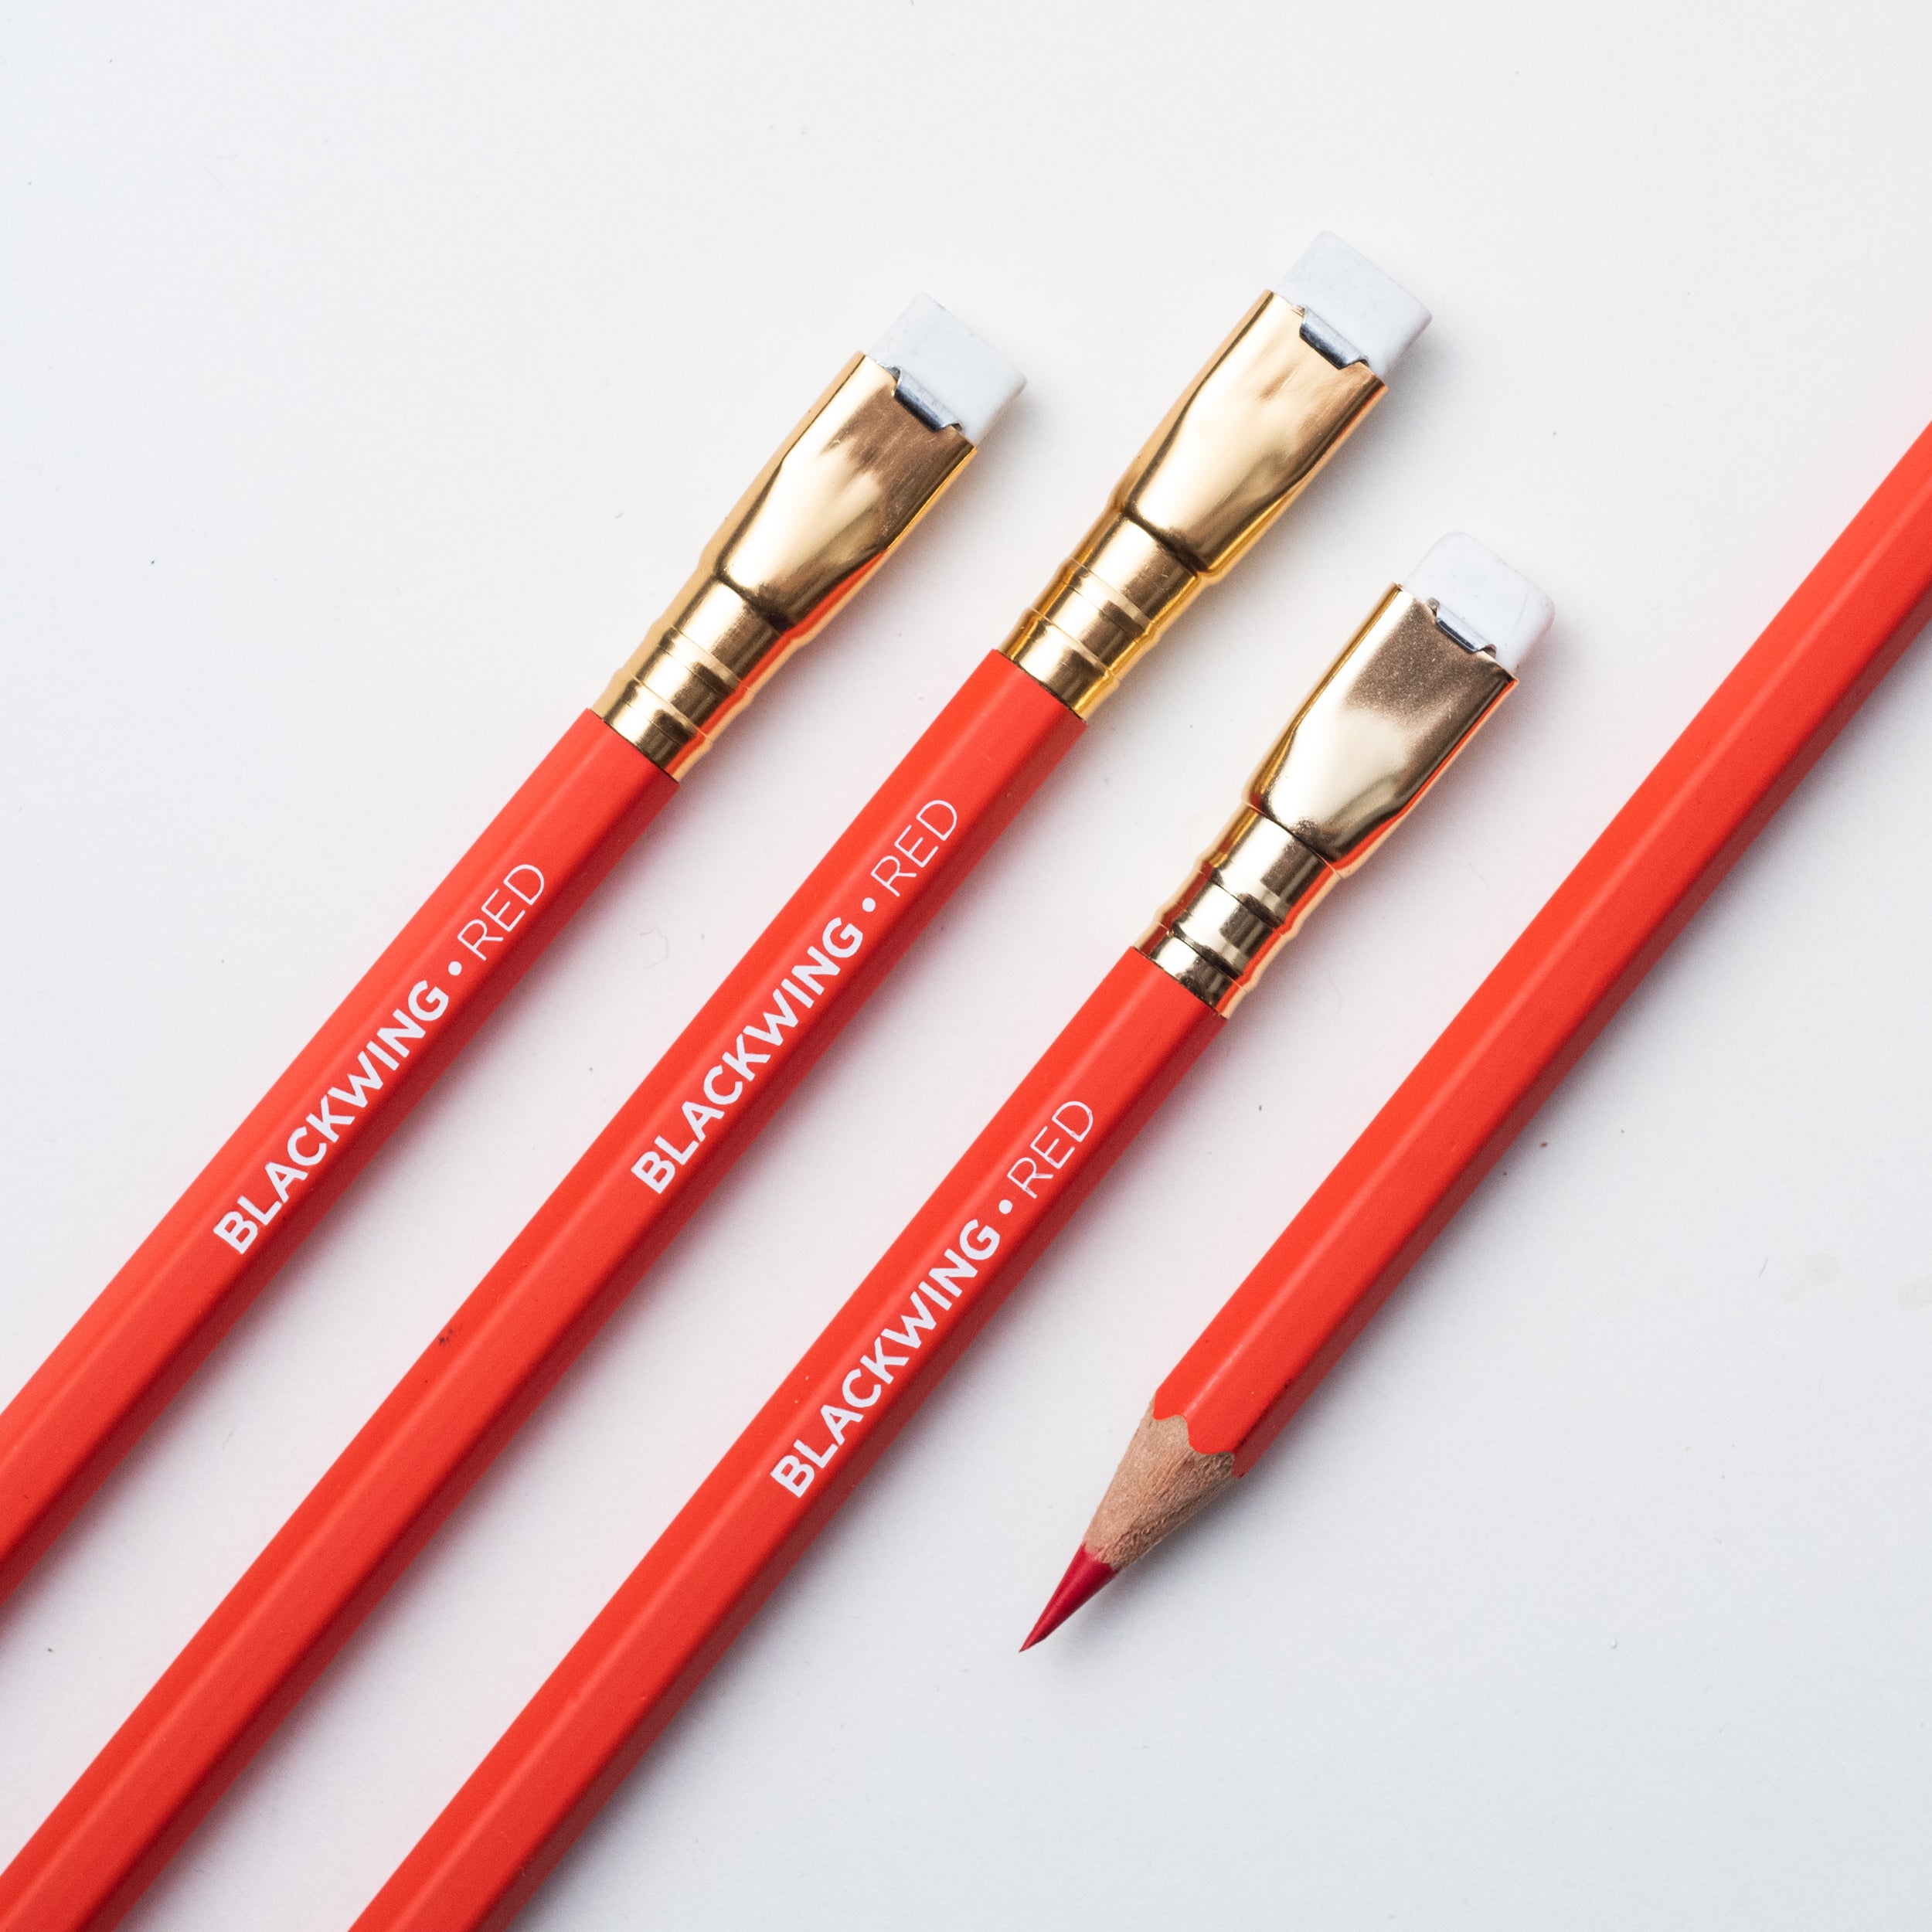 Three Blackwing Red pencils on a white surface, perfect for sketching.